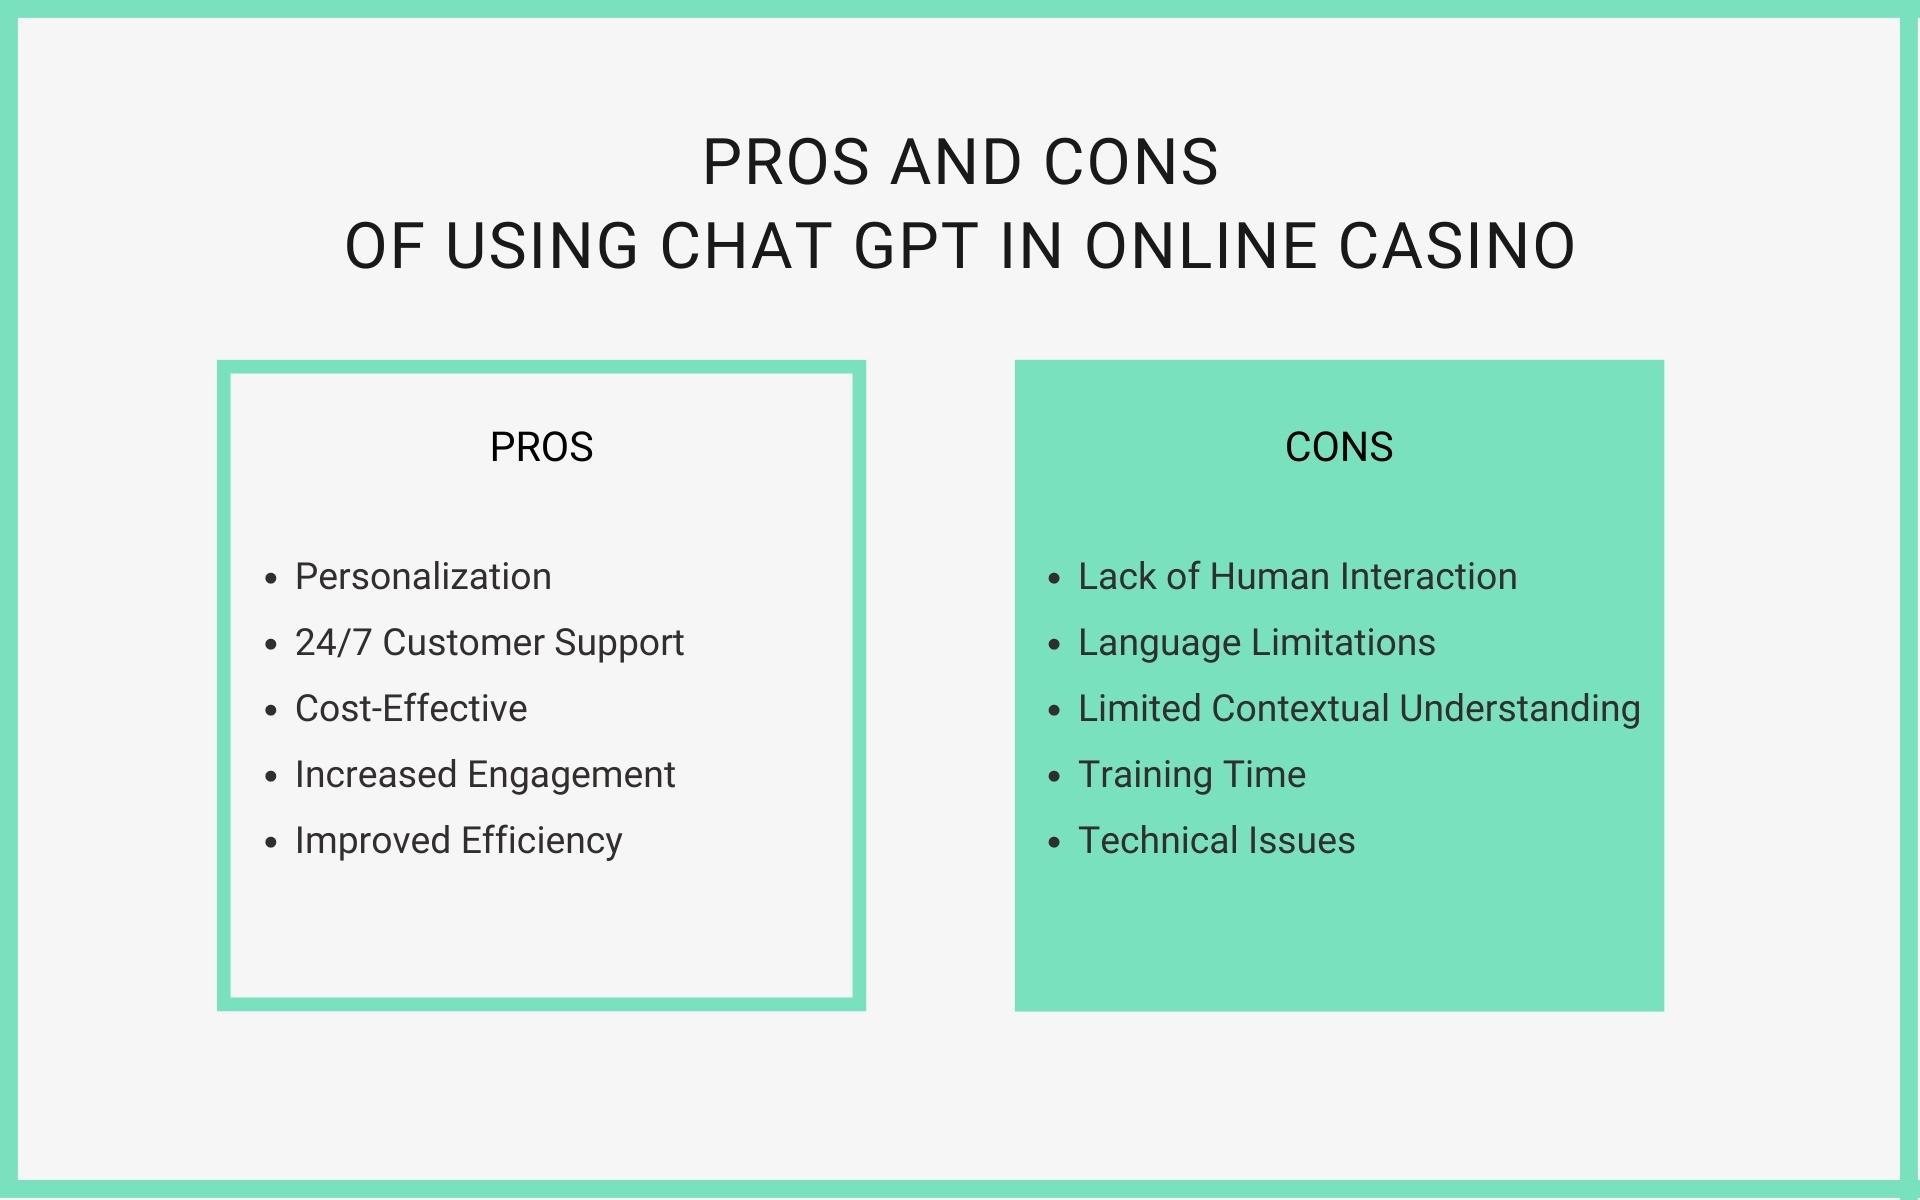 Pros and cons of Chat GPT